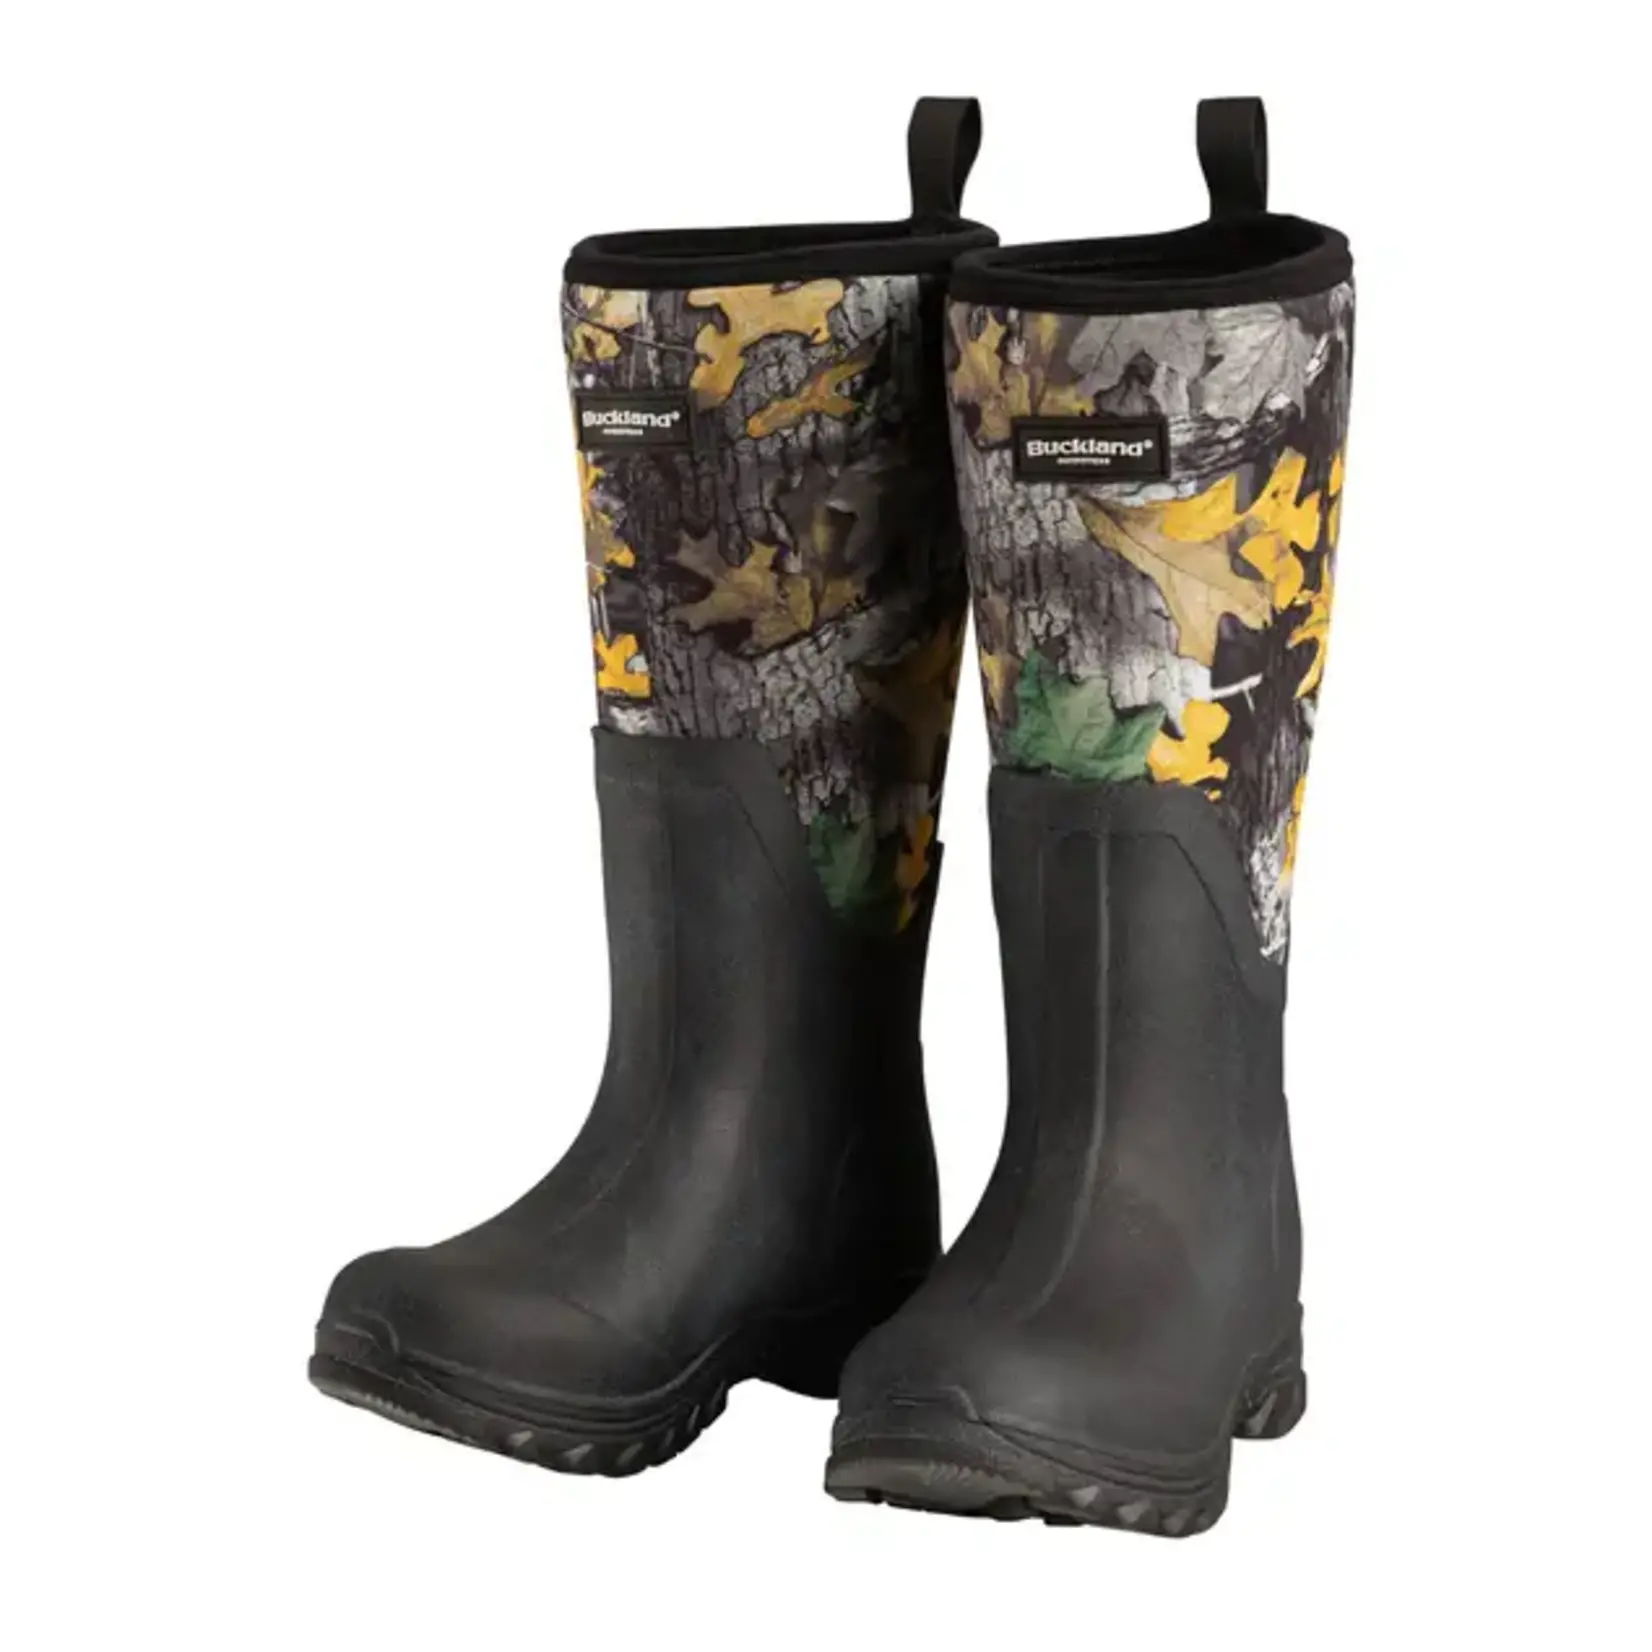 Bottes Buckland Neo Trail Femme Camouflage